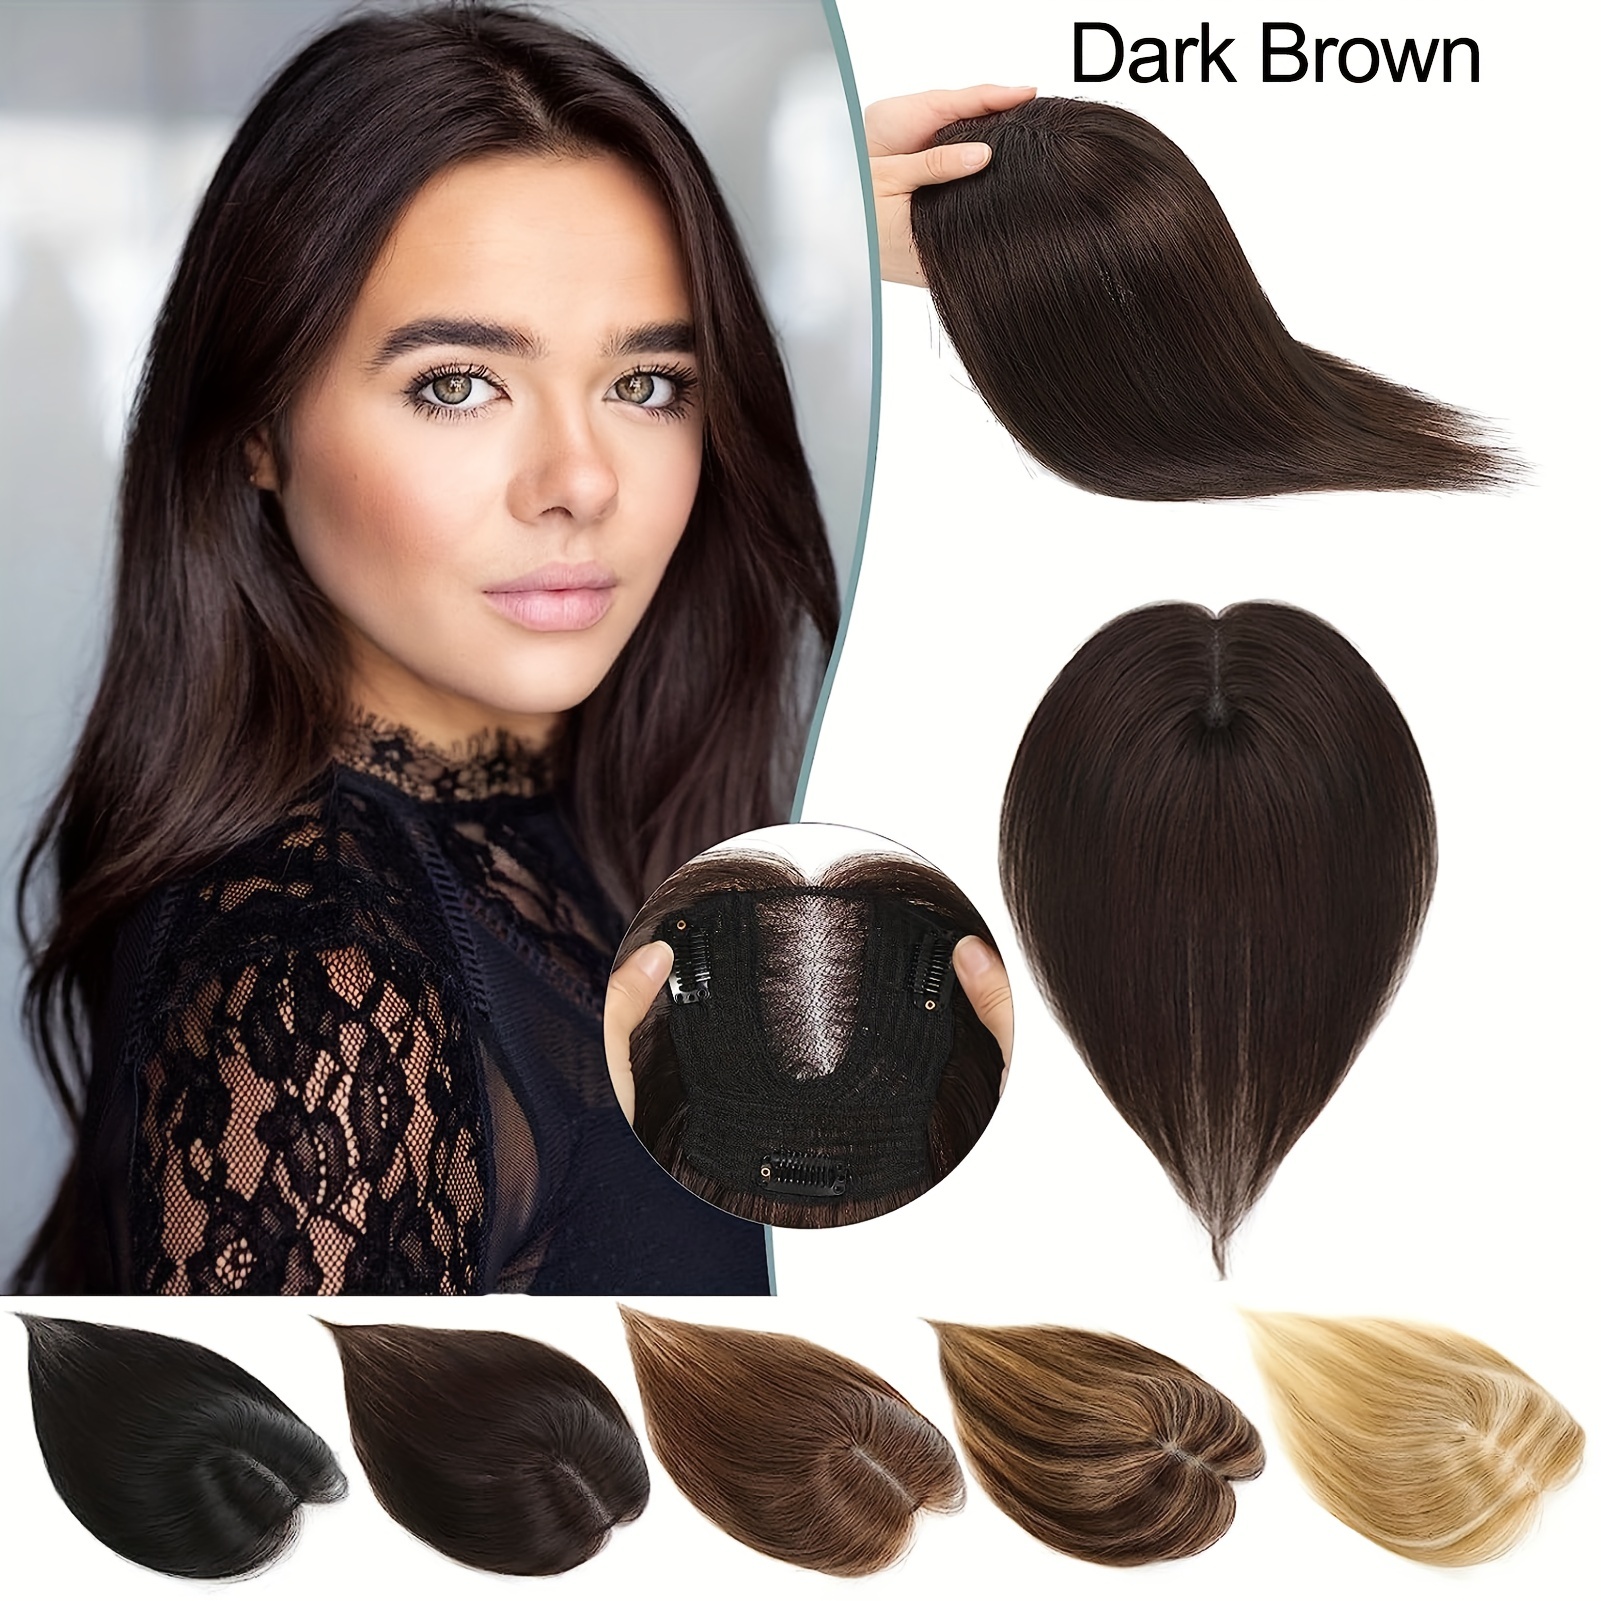 Straight Human Hair Toppers for Women Real Human Hair, 10 Inch Hair Toppers  for Women No Bangs Top Hair Extensions Hair Pieces for Thinning Hair  Wiglets